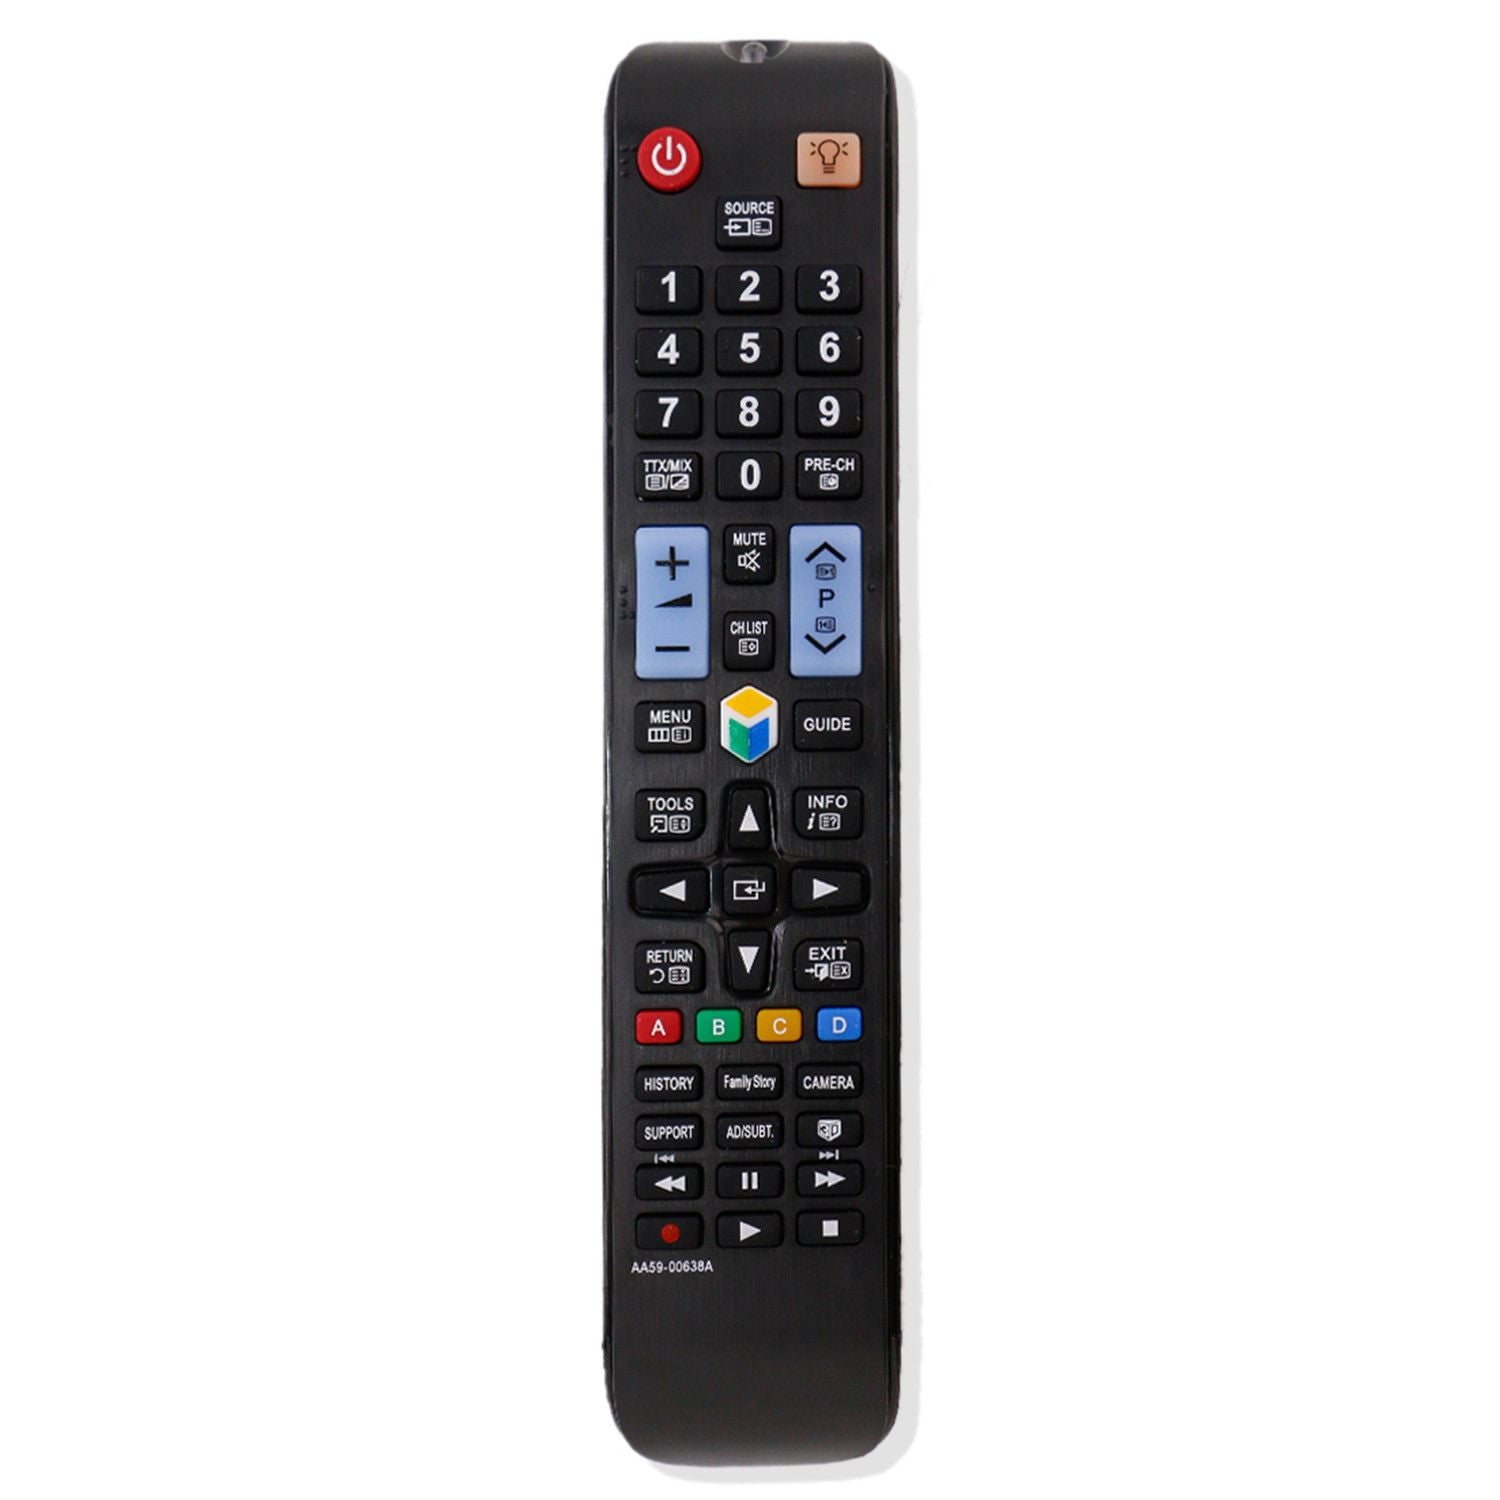 AA59-00638A Replacement Remote Control fit for Samsung UA60ES8000MXRD UA60ES8000MXXY